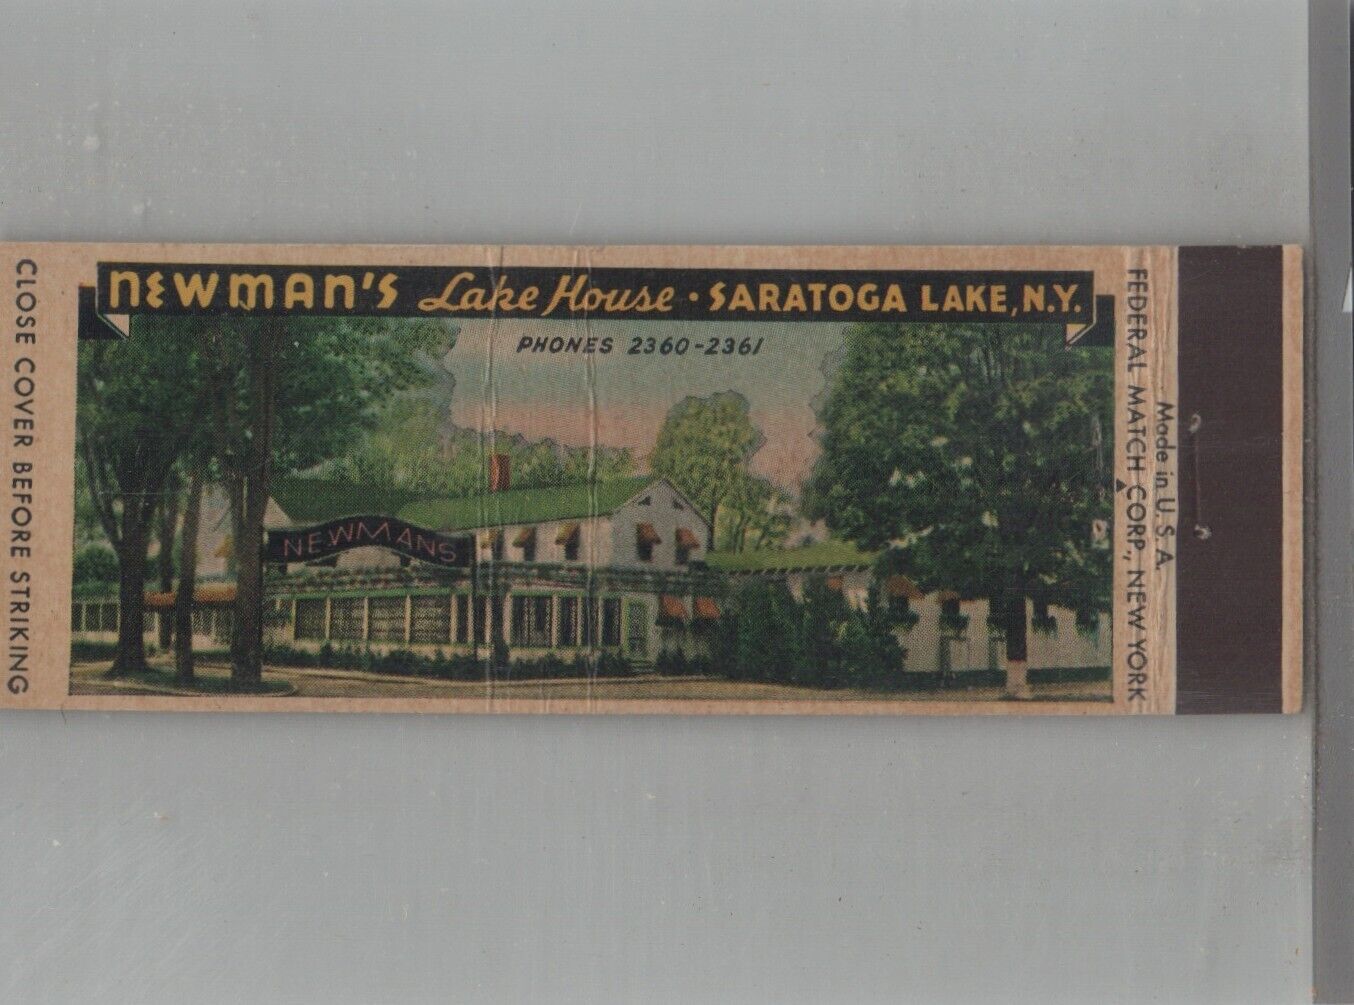 Matchbook Cover 1920s-30's Federal Match Newman's Lake House Saratoga Lake NY